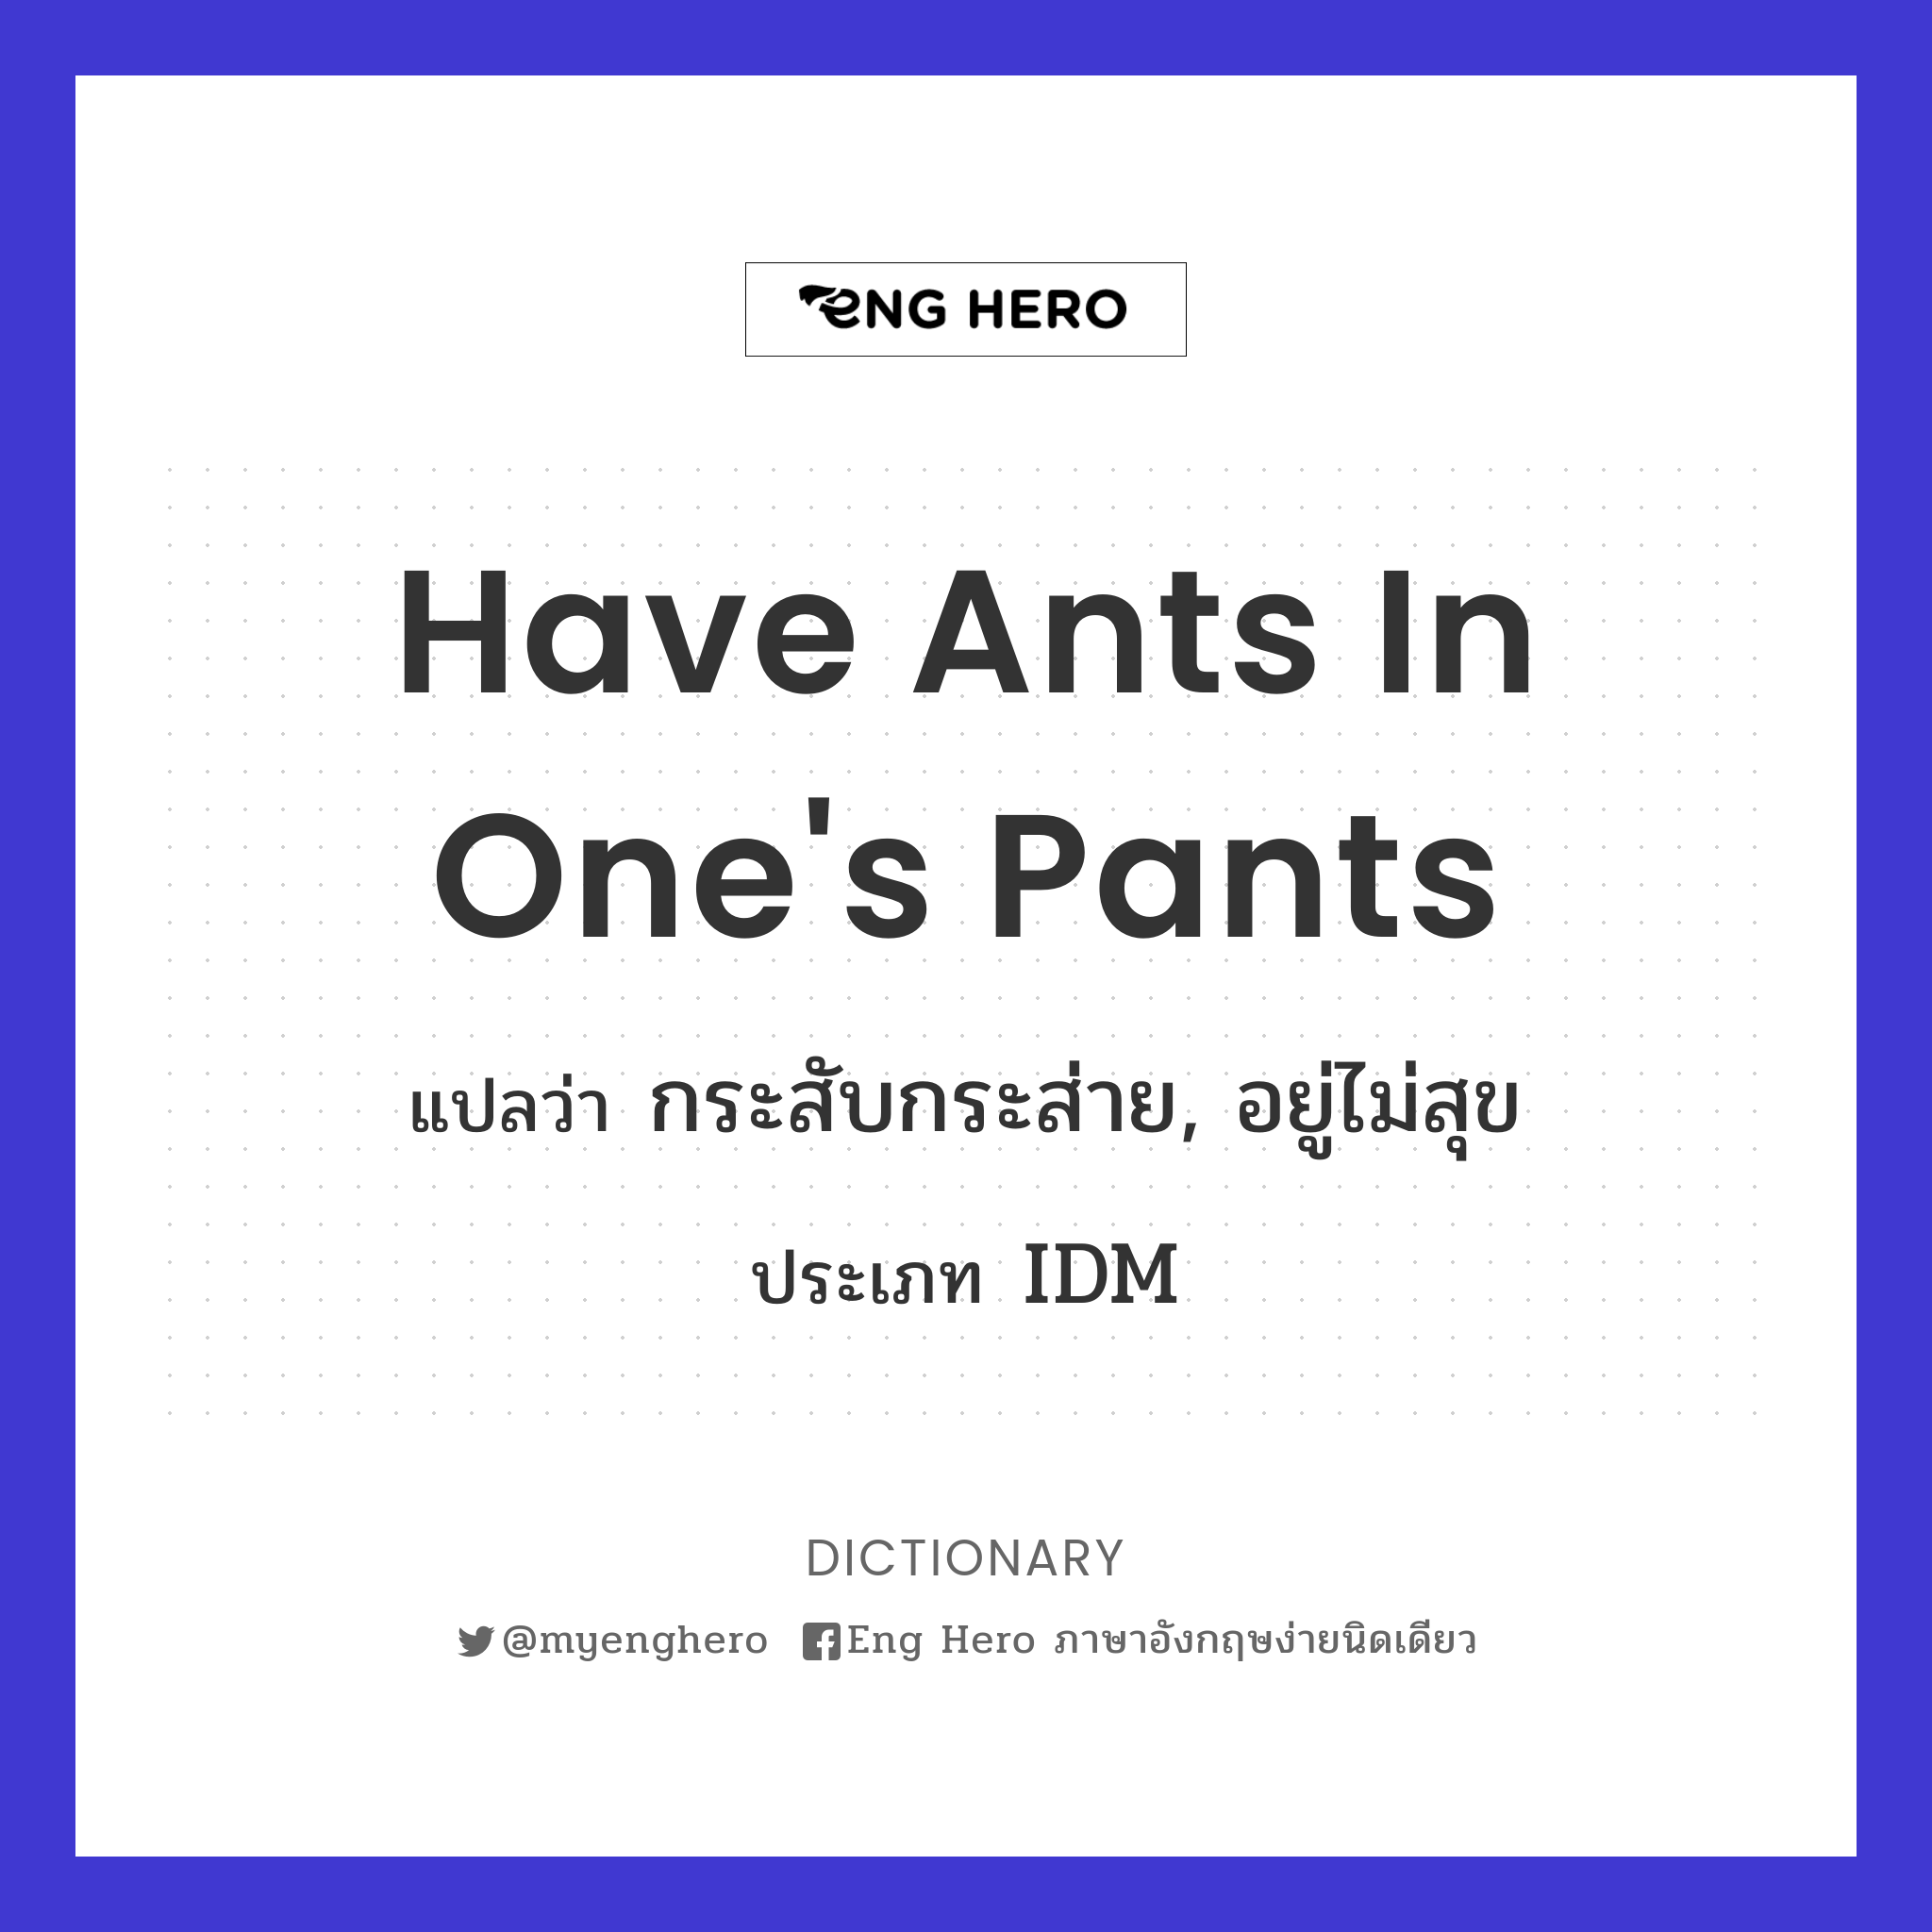 have ants in one's pants